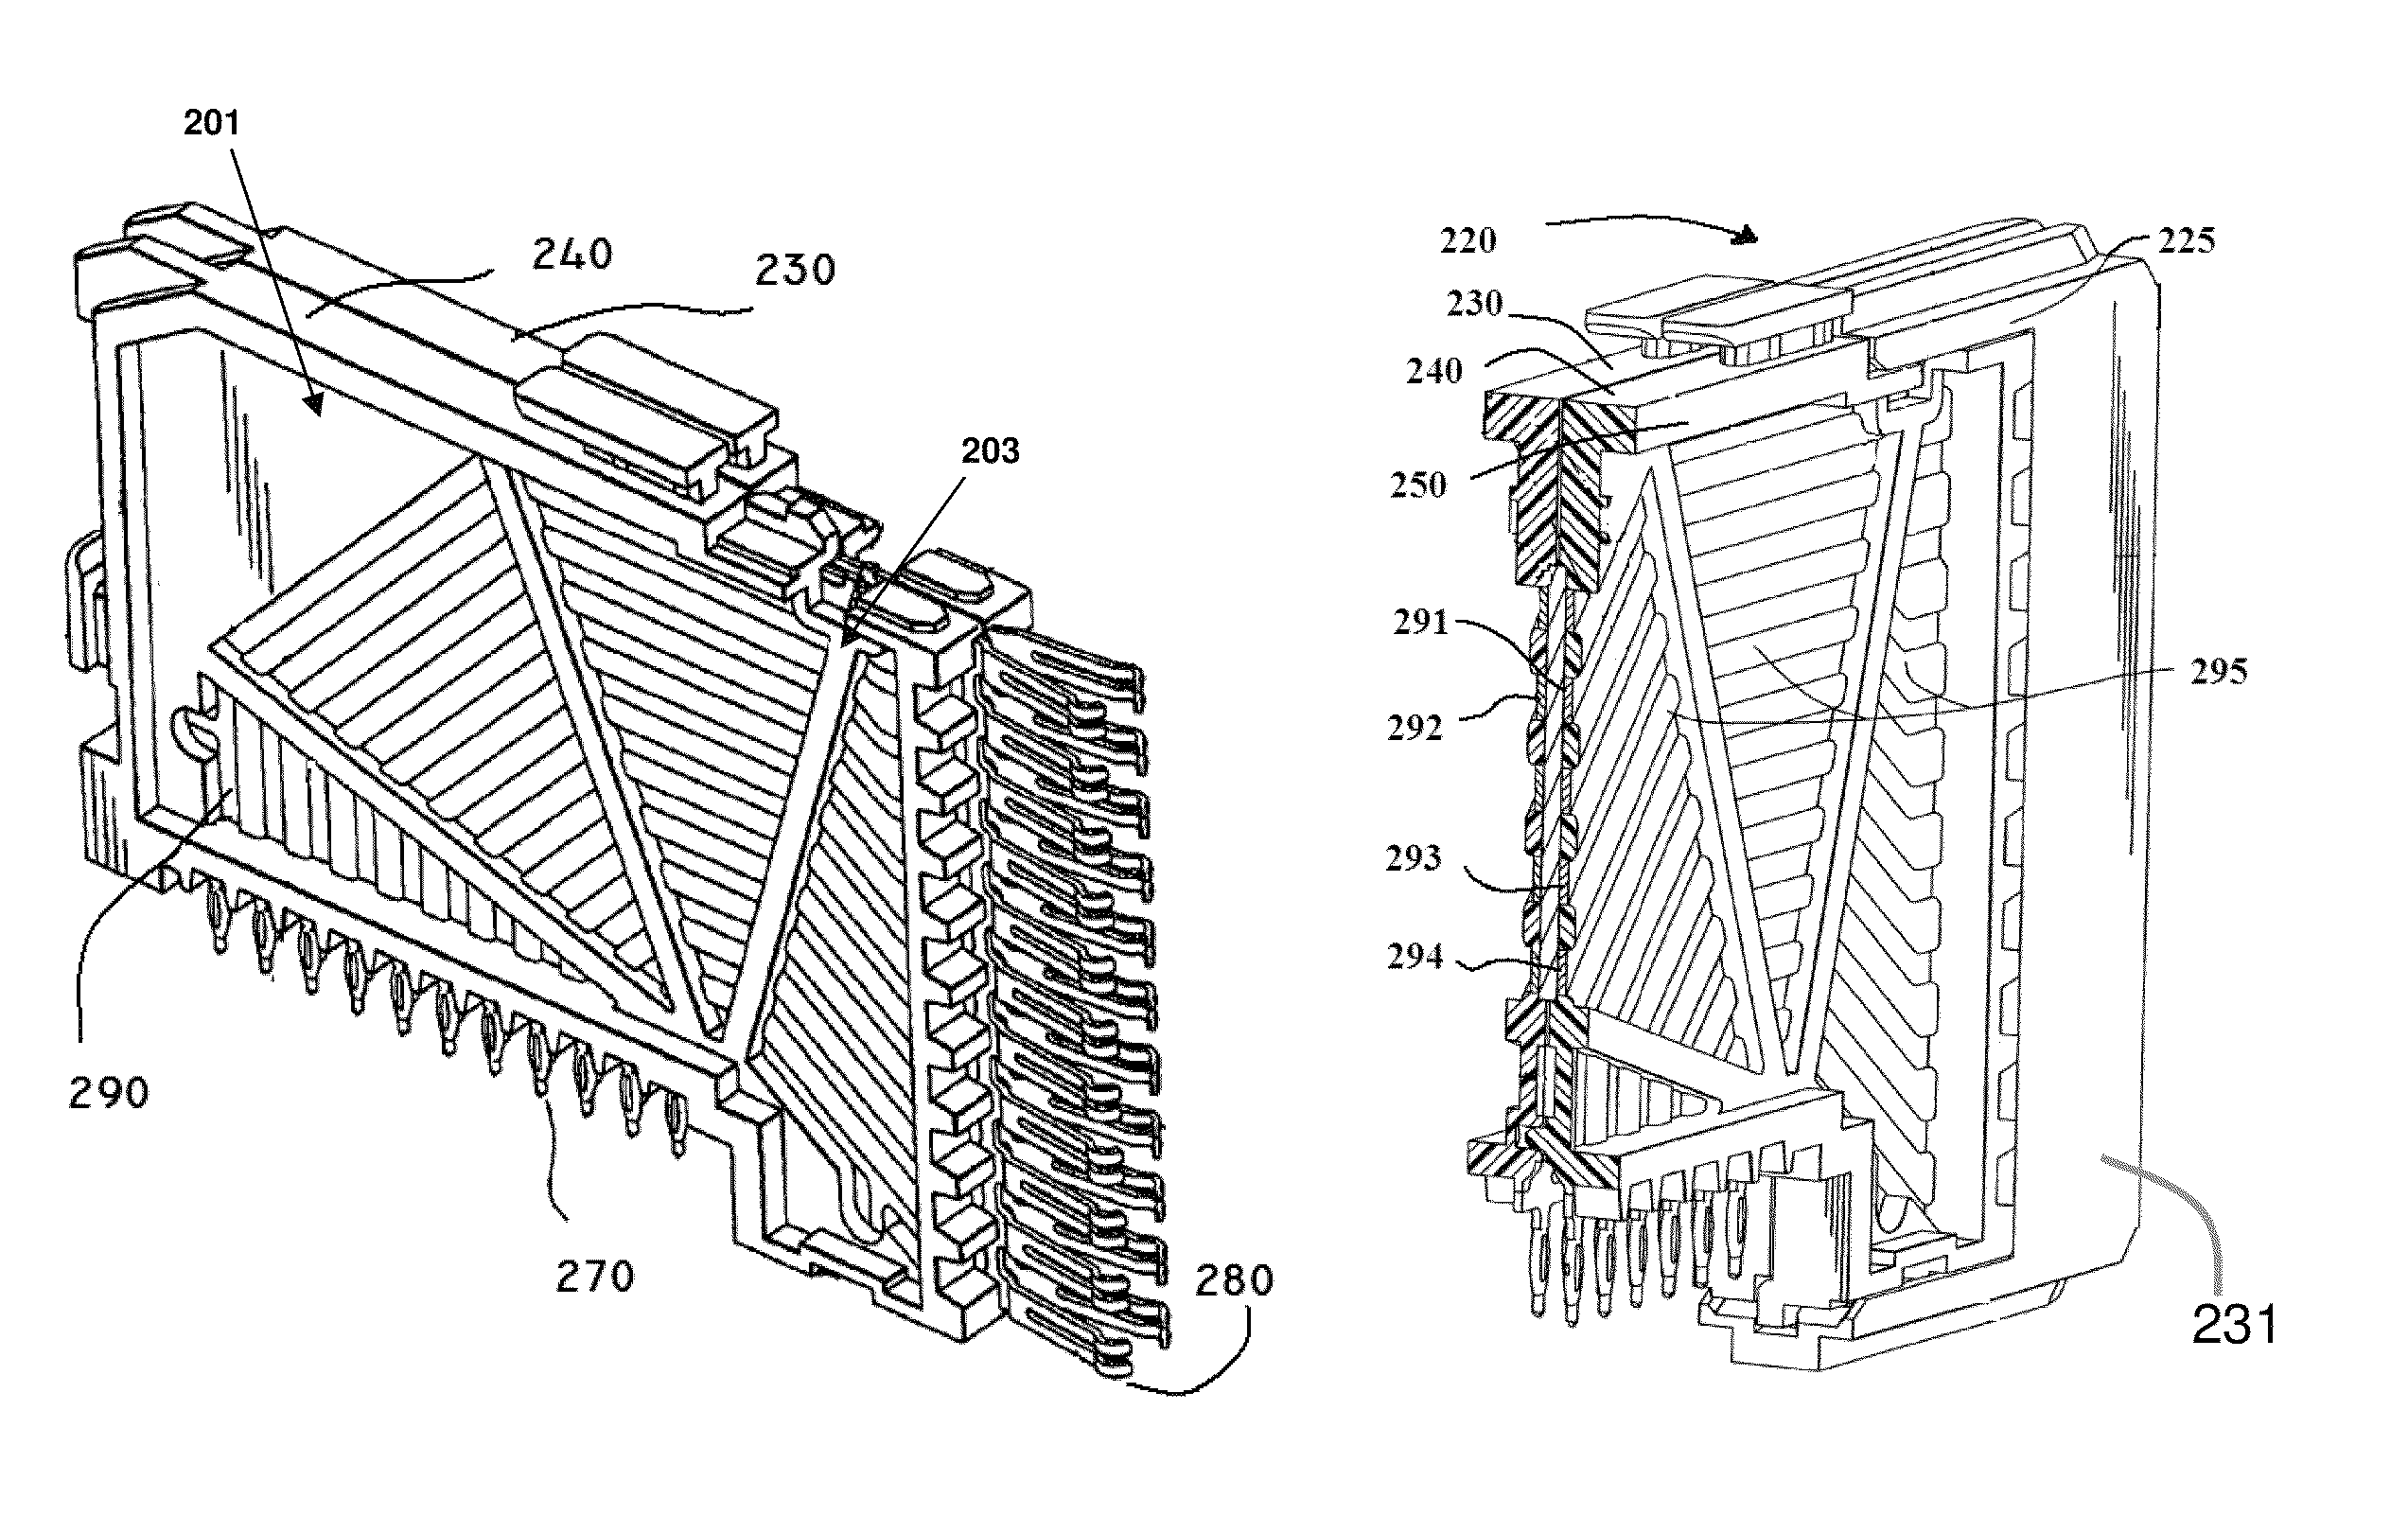 Electrical connector with hybrid shield